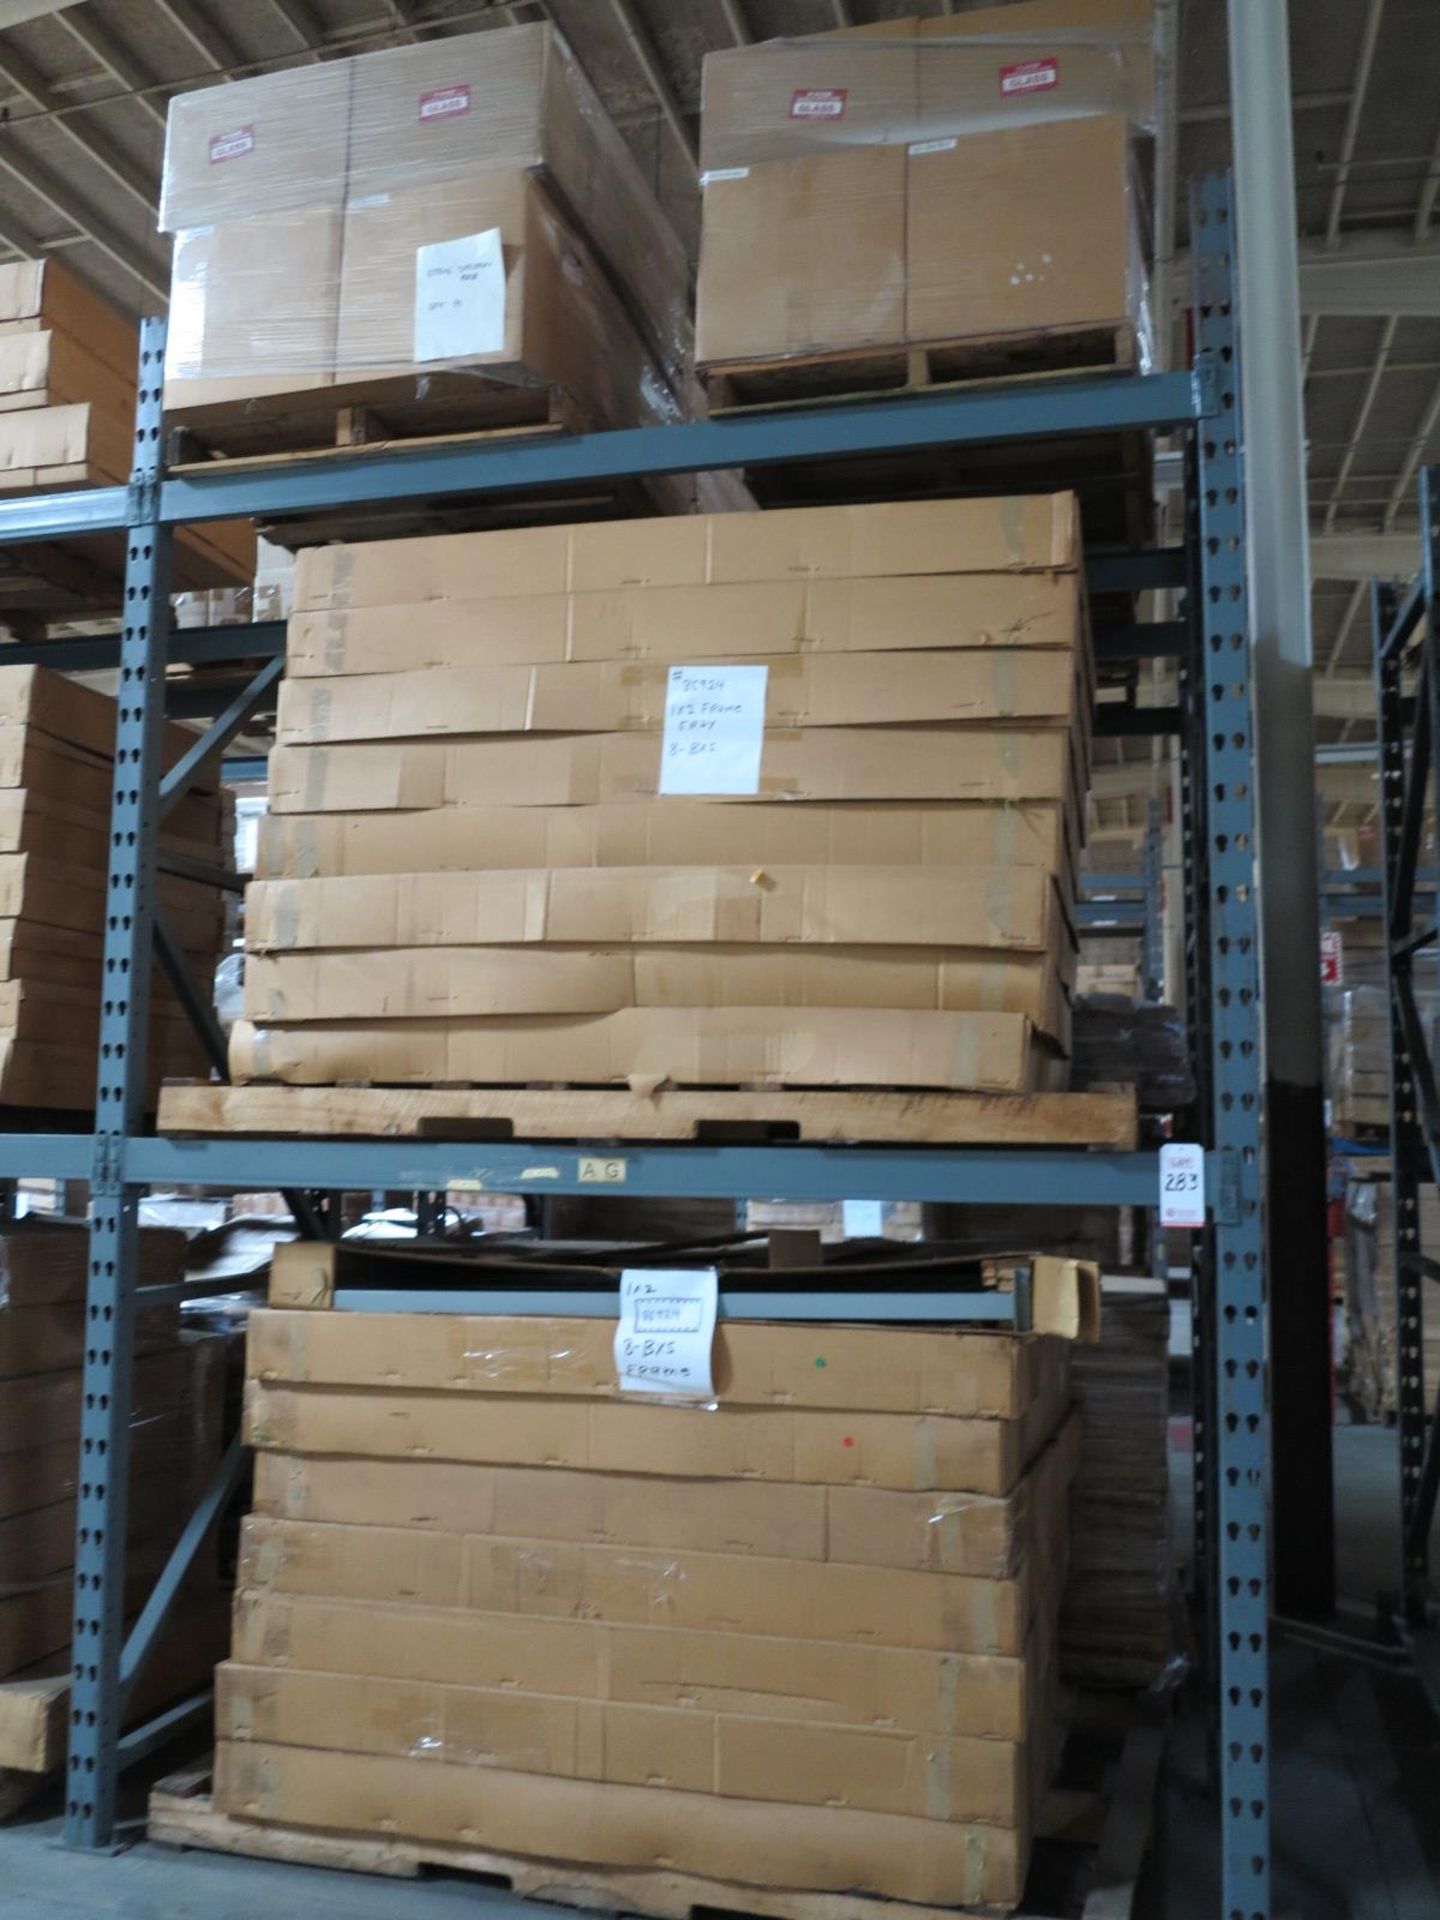 LOT - CONTENTS OF (2) SECTIONS OF PALLET RACK TO INCLUDE: ITEM # 86924, 1 X 2 FRAMES; ITEM #